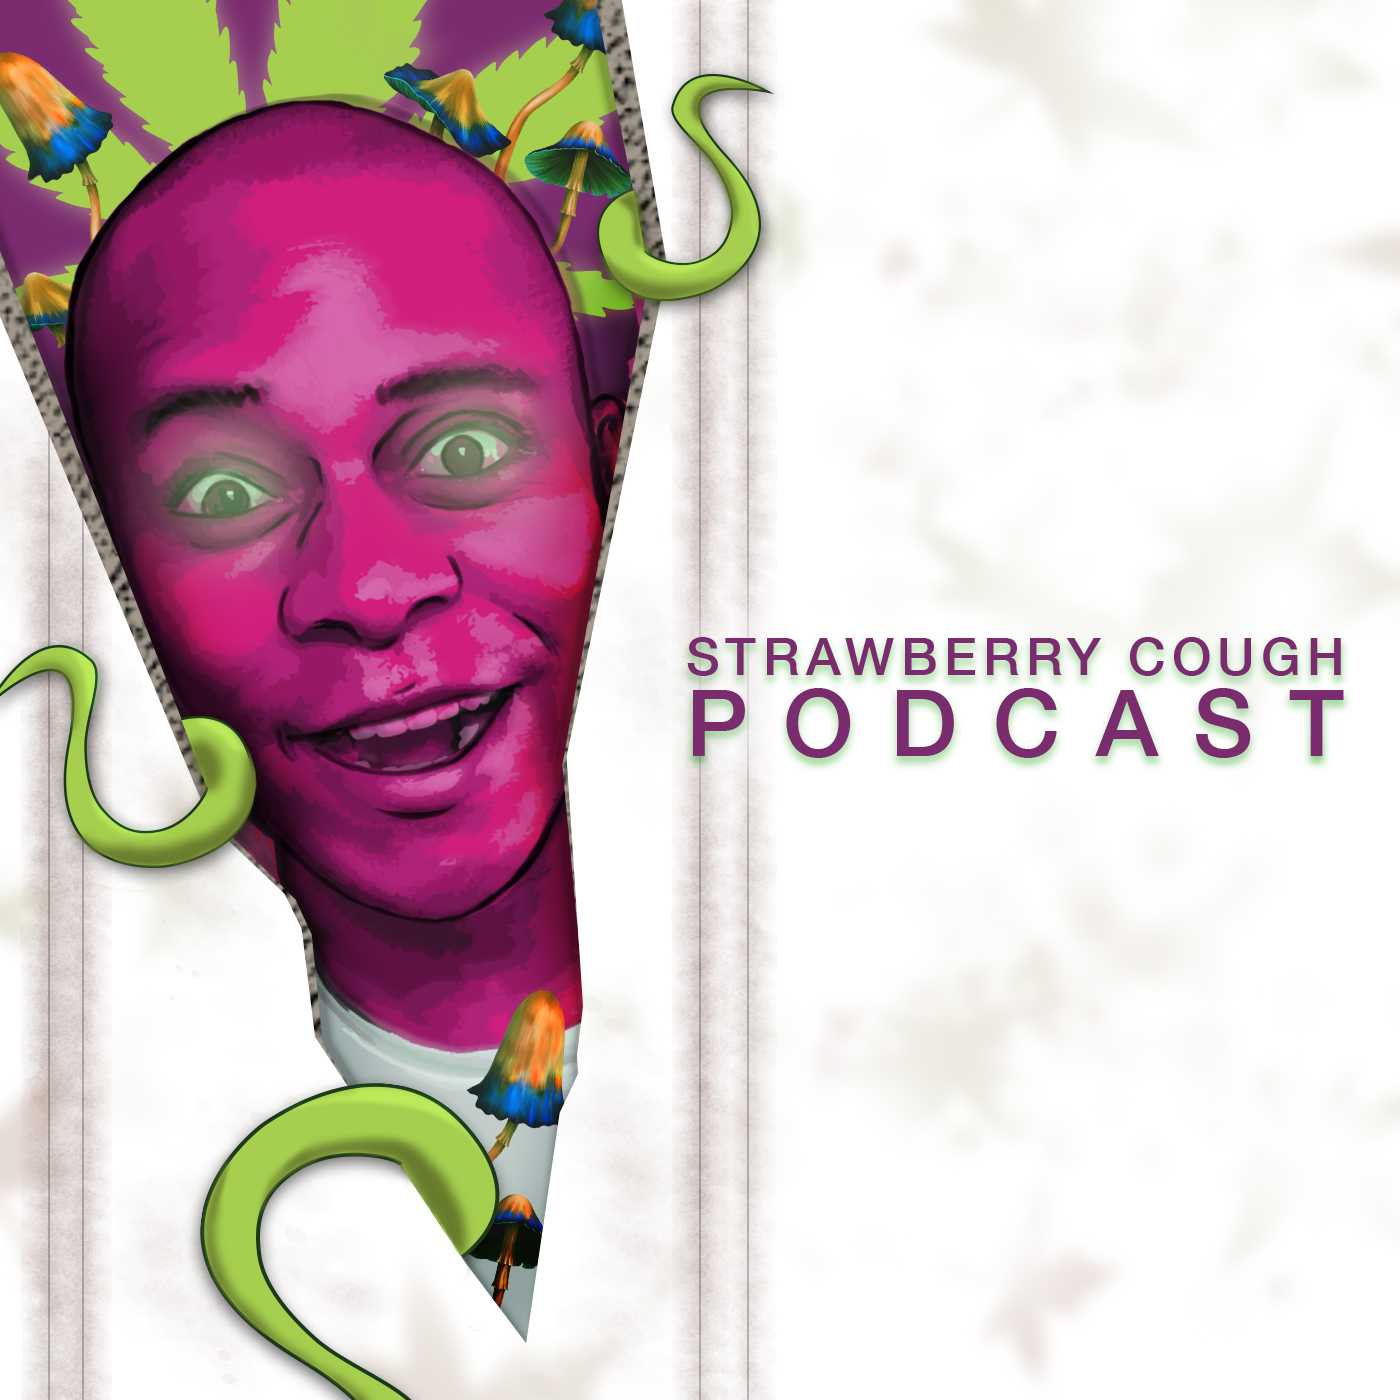 Strawberry Cough Podcast